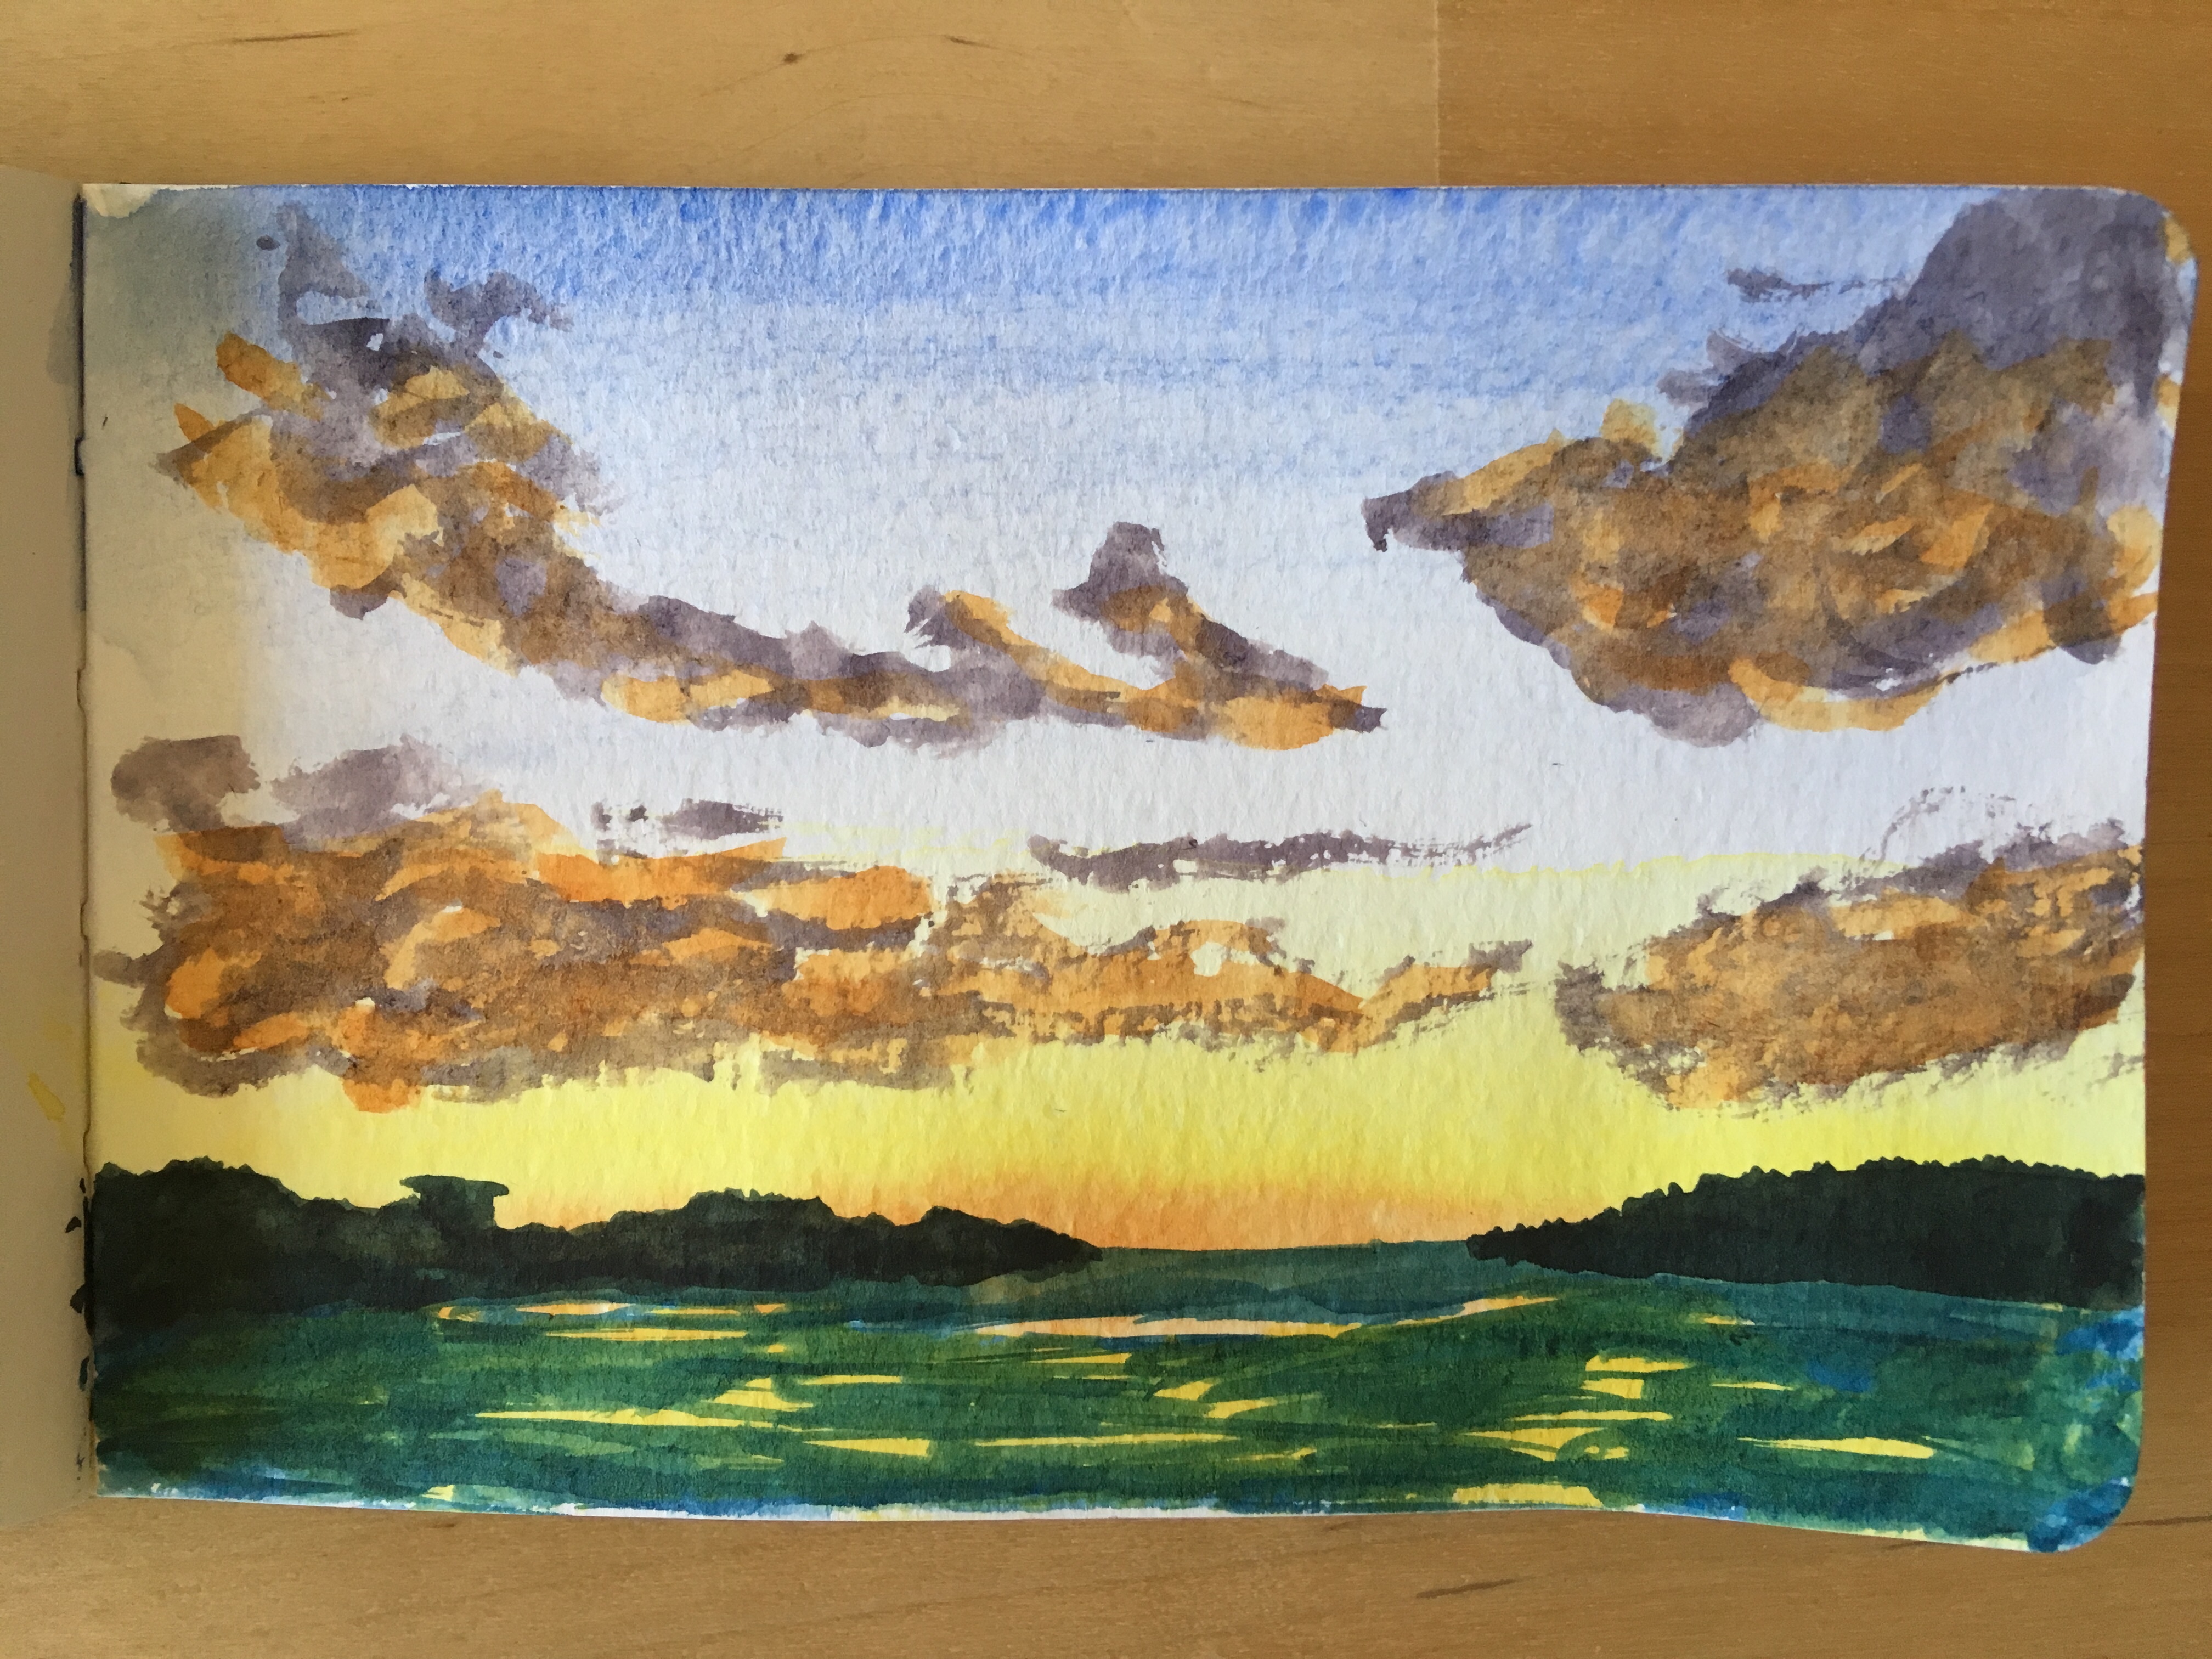 A watercolour painting of a setting sun